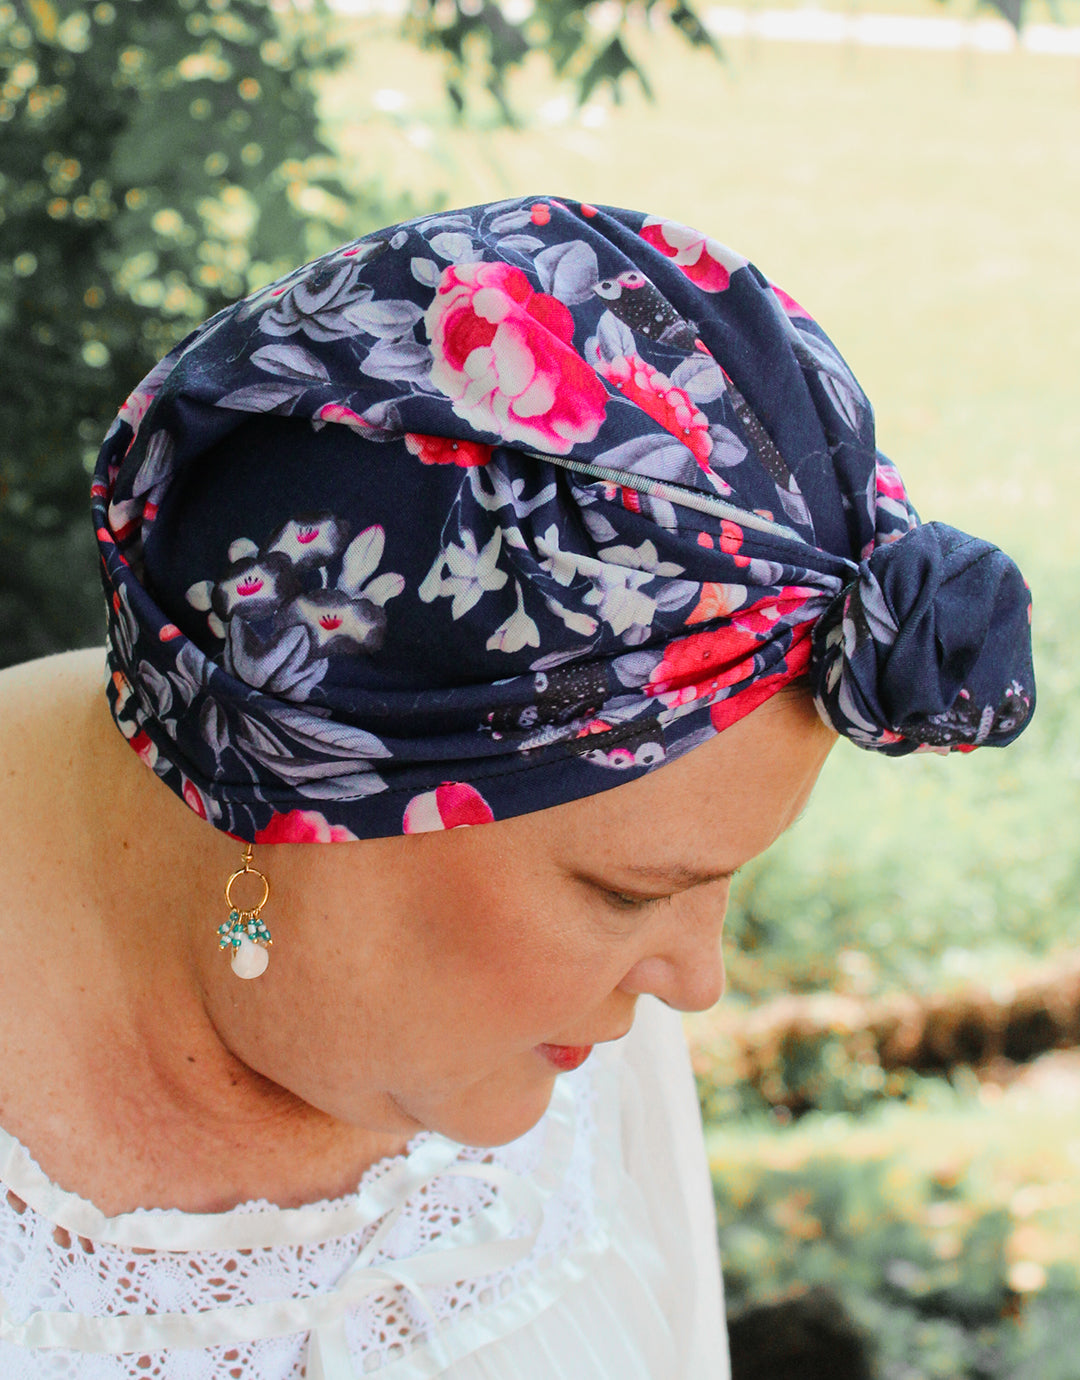 BANDED Women’s Full Coverage Headwraps + Hair Accessories - Blue Royal Apartment - Multi-style Headwrap